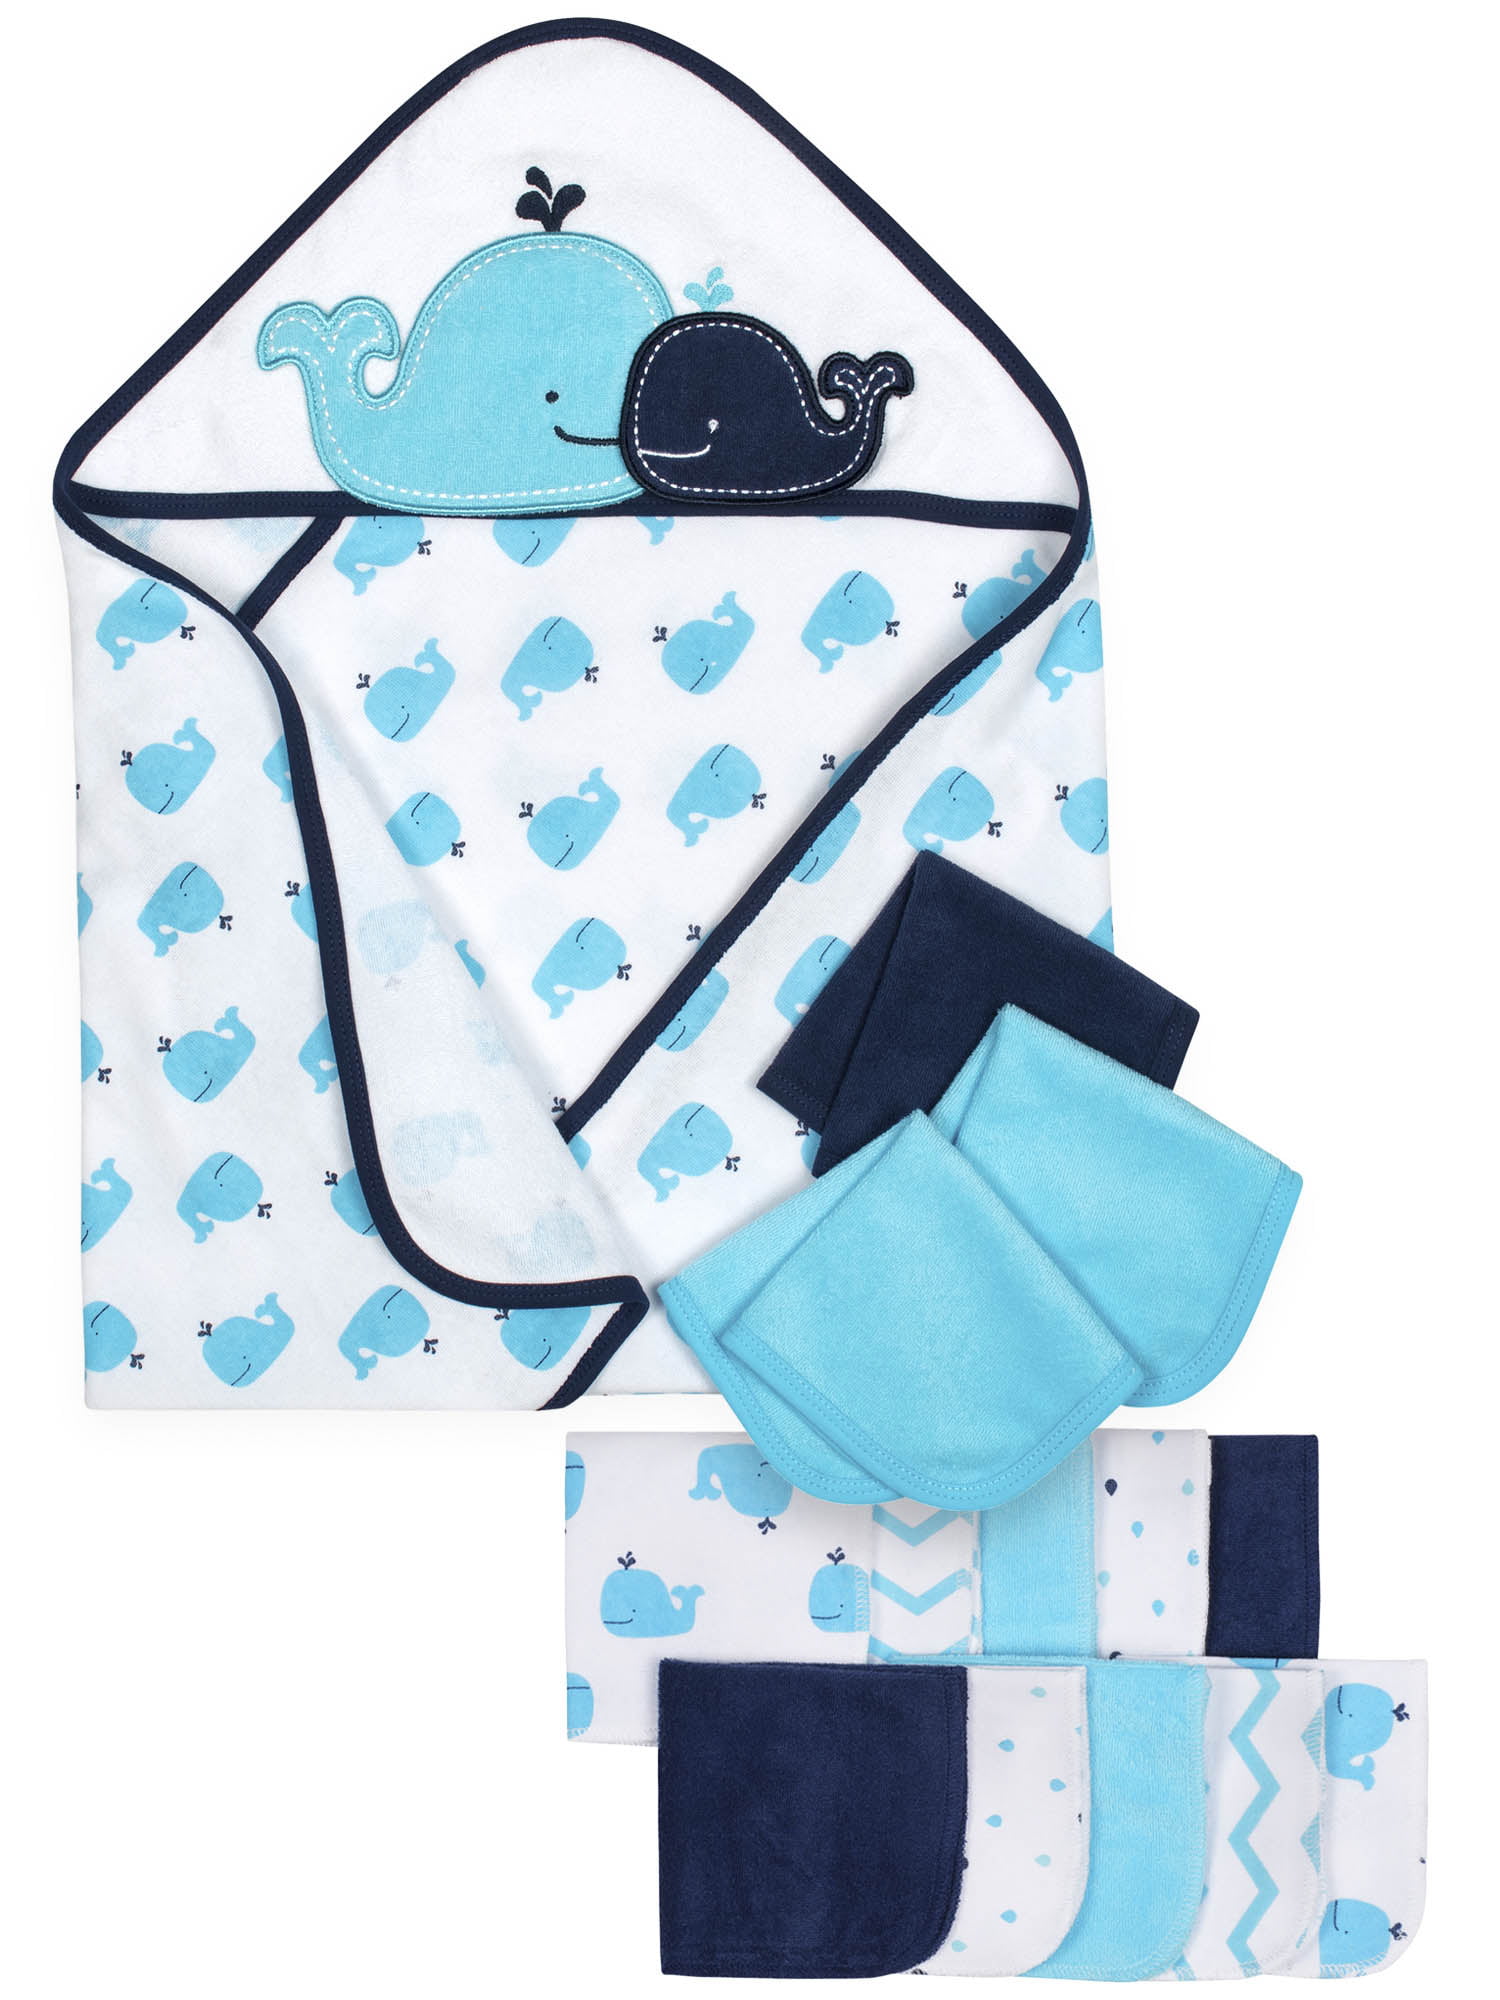 Baby Bath Towels For Boys - Curbblan Baby bath Towel children newborn bath towels ... - Themed towels, to match the décor of the bathroom, can be found in a variety of patterns.